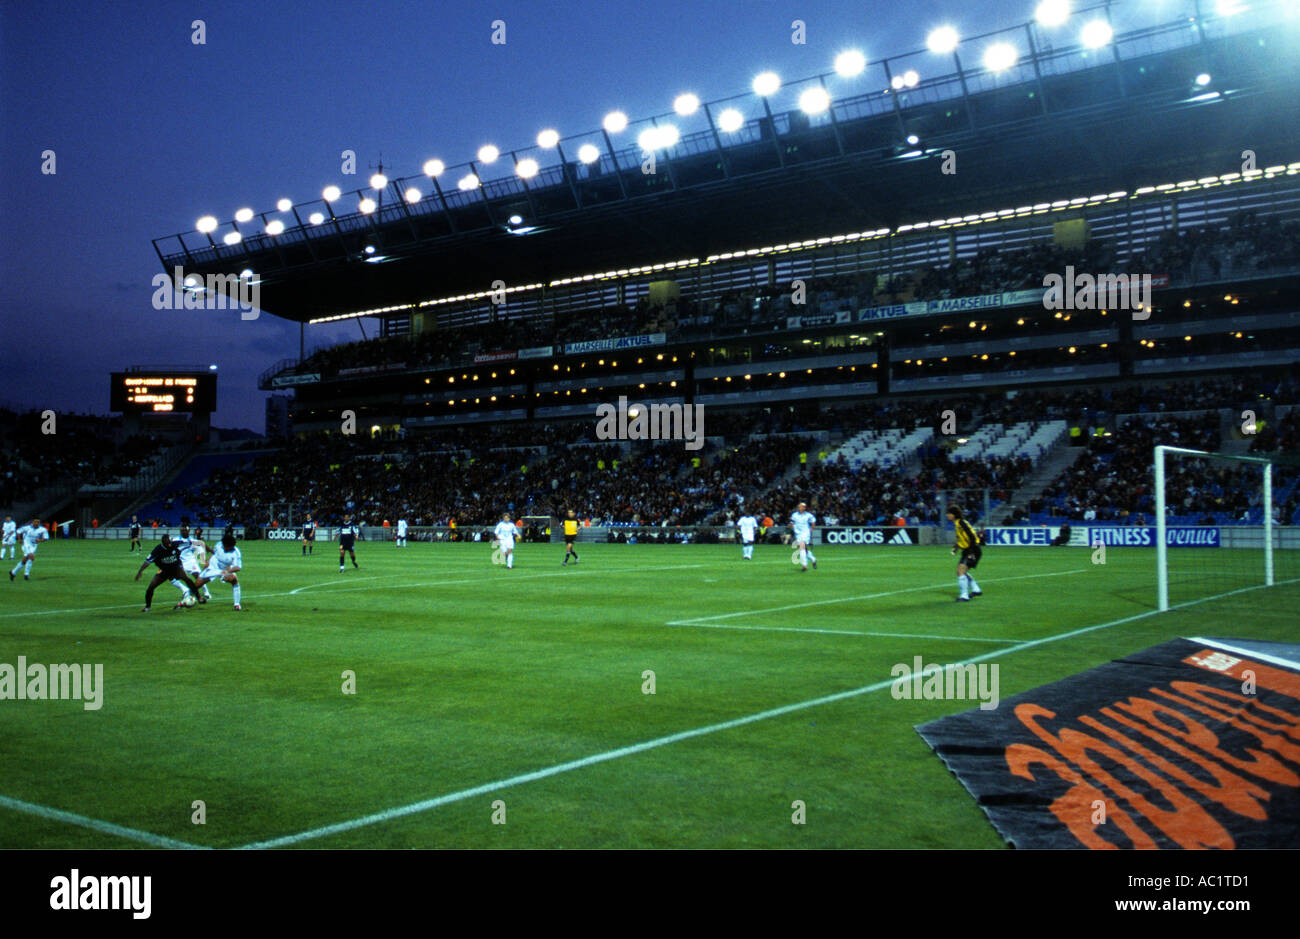 Olymique Marseile Football Club playing a league game at their Stade Velodrome stadium Stock Photo